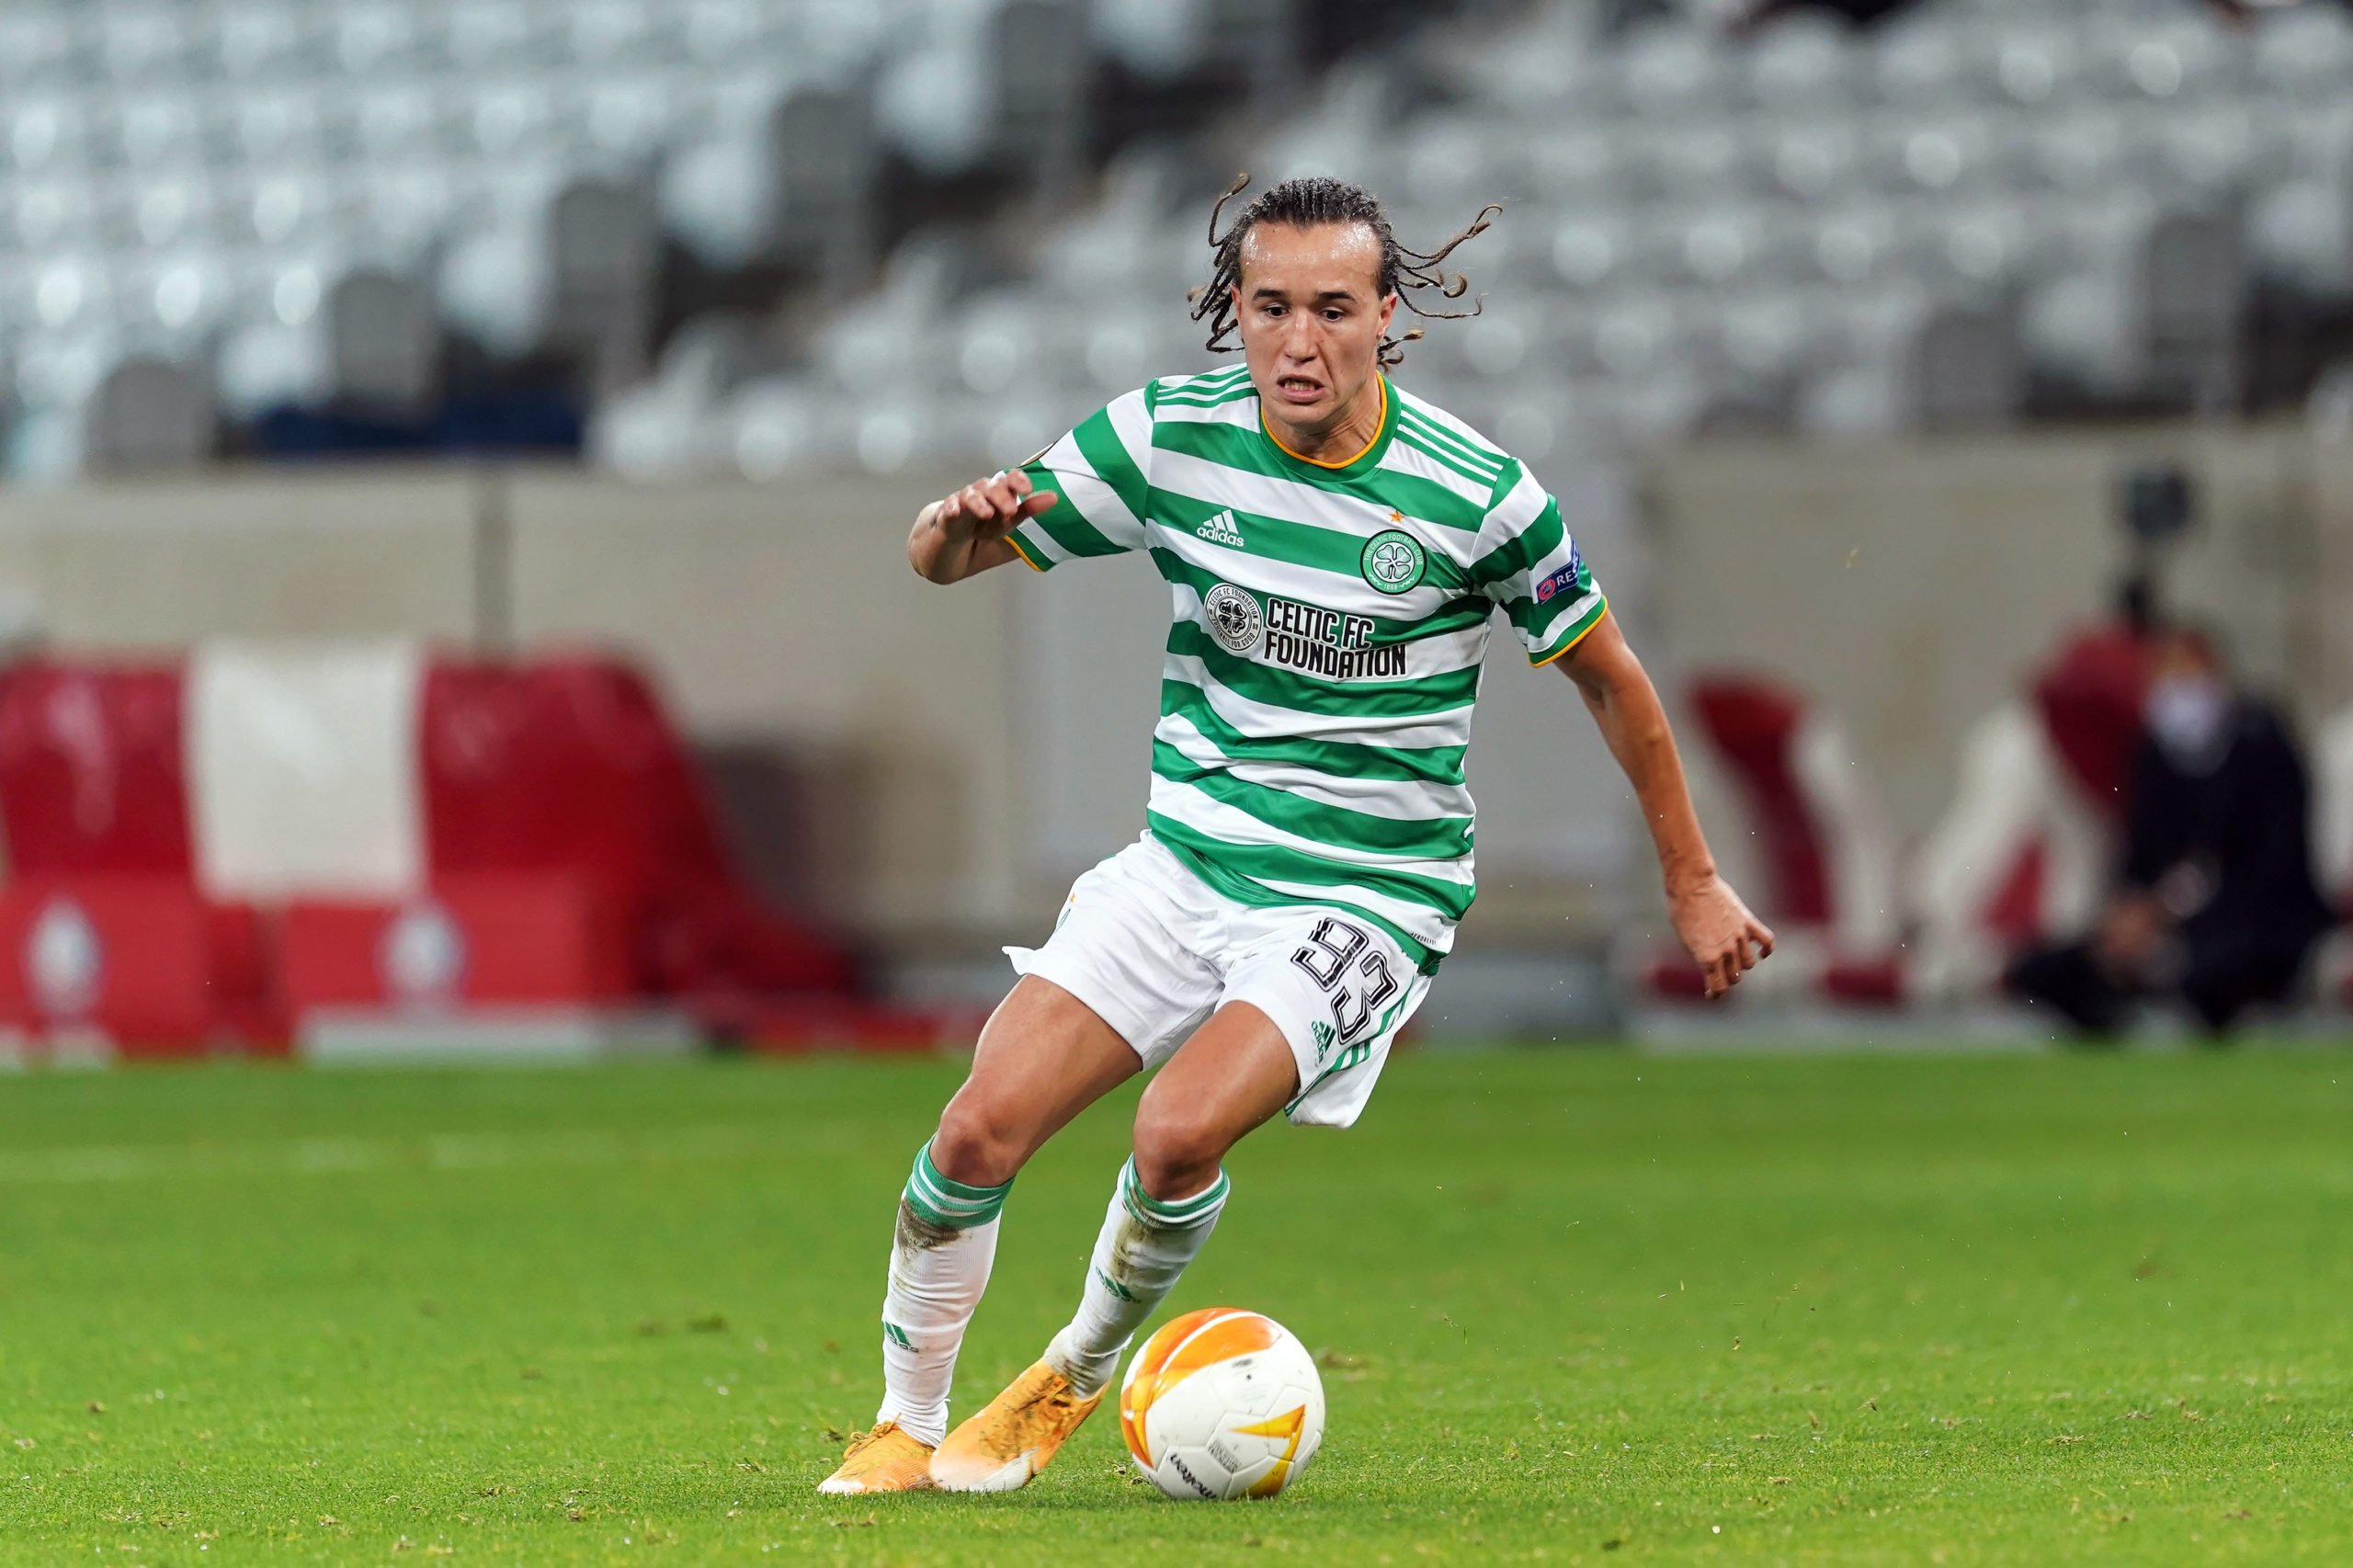 Diego Laxalt in the starting XI is an absolute must for Celtic at Ibrox